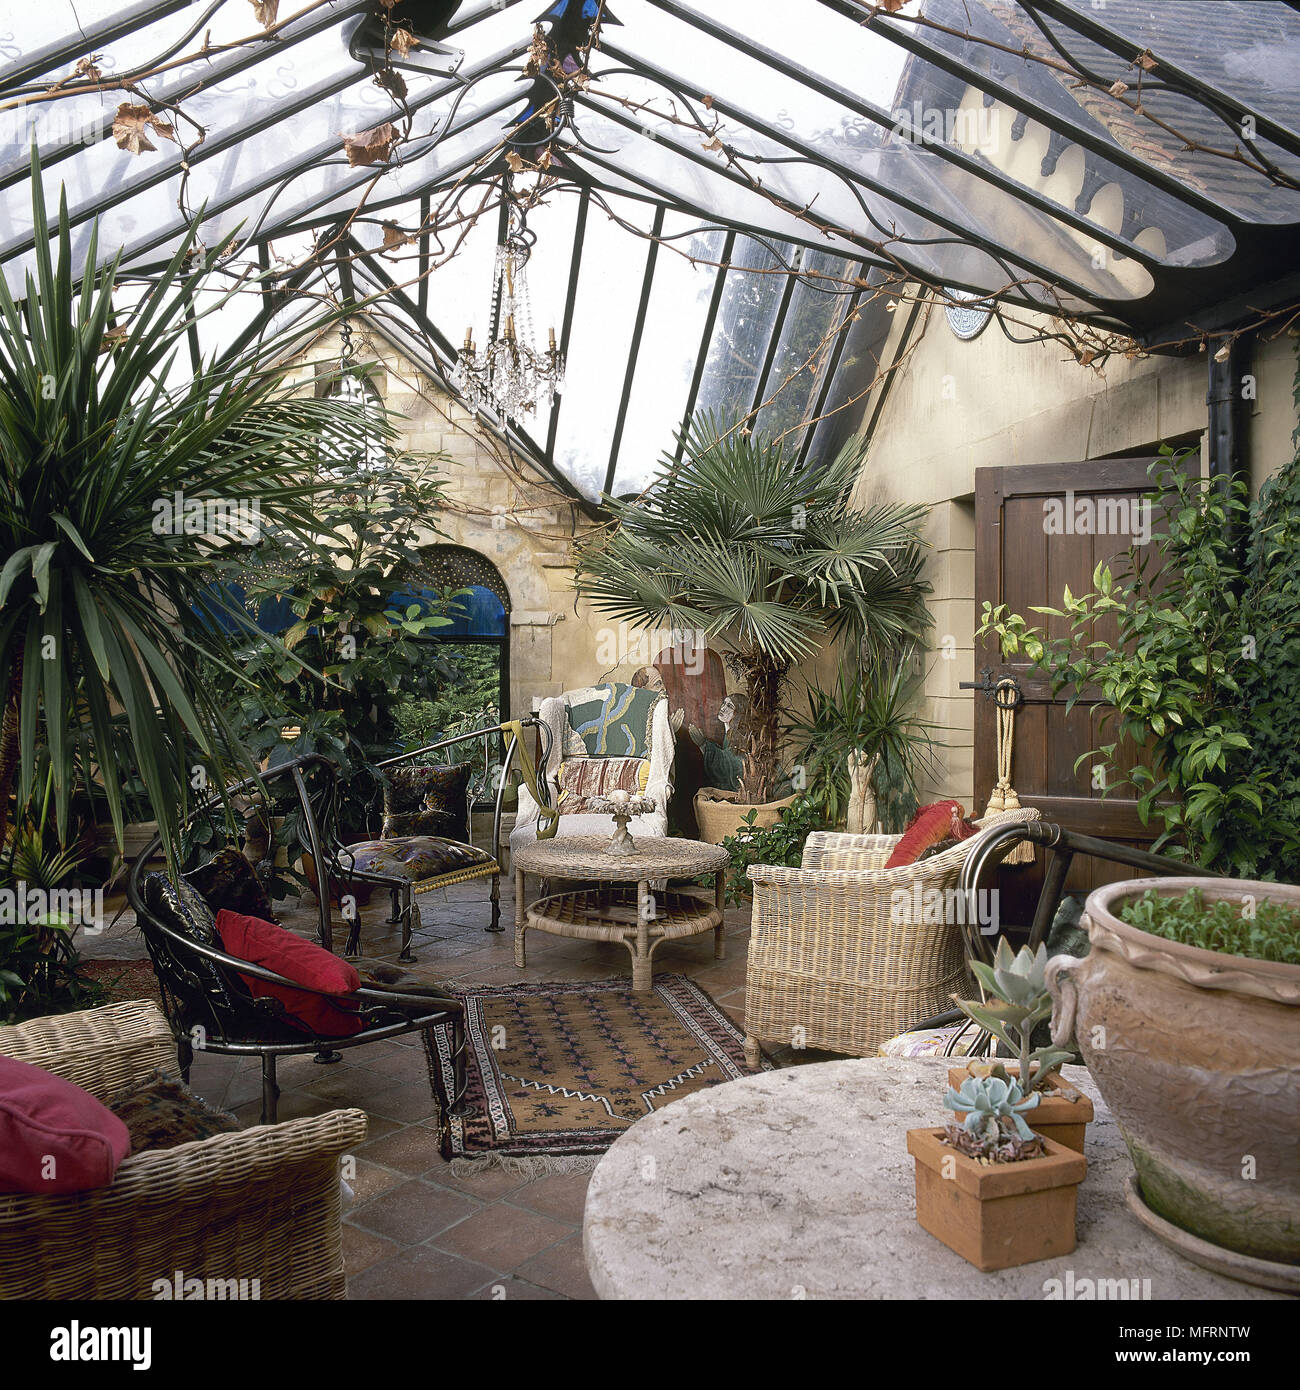 Country style conservatory, garden room with cane furniture and palm trees, Stock Photo